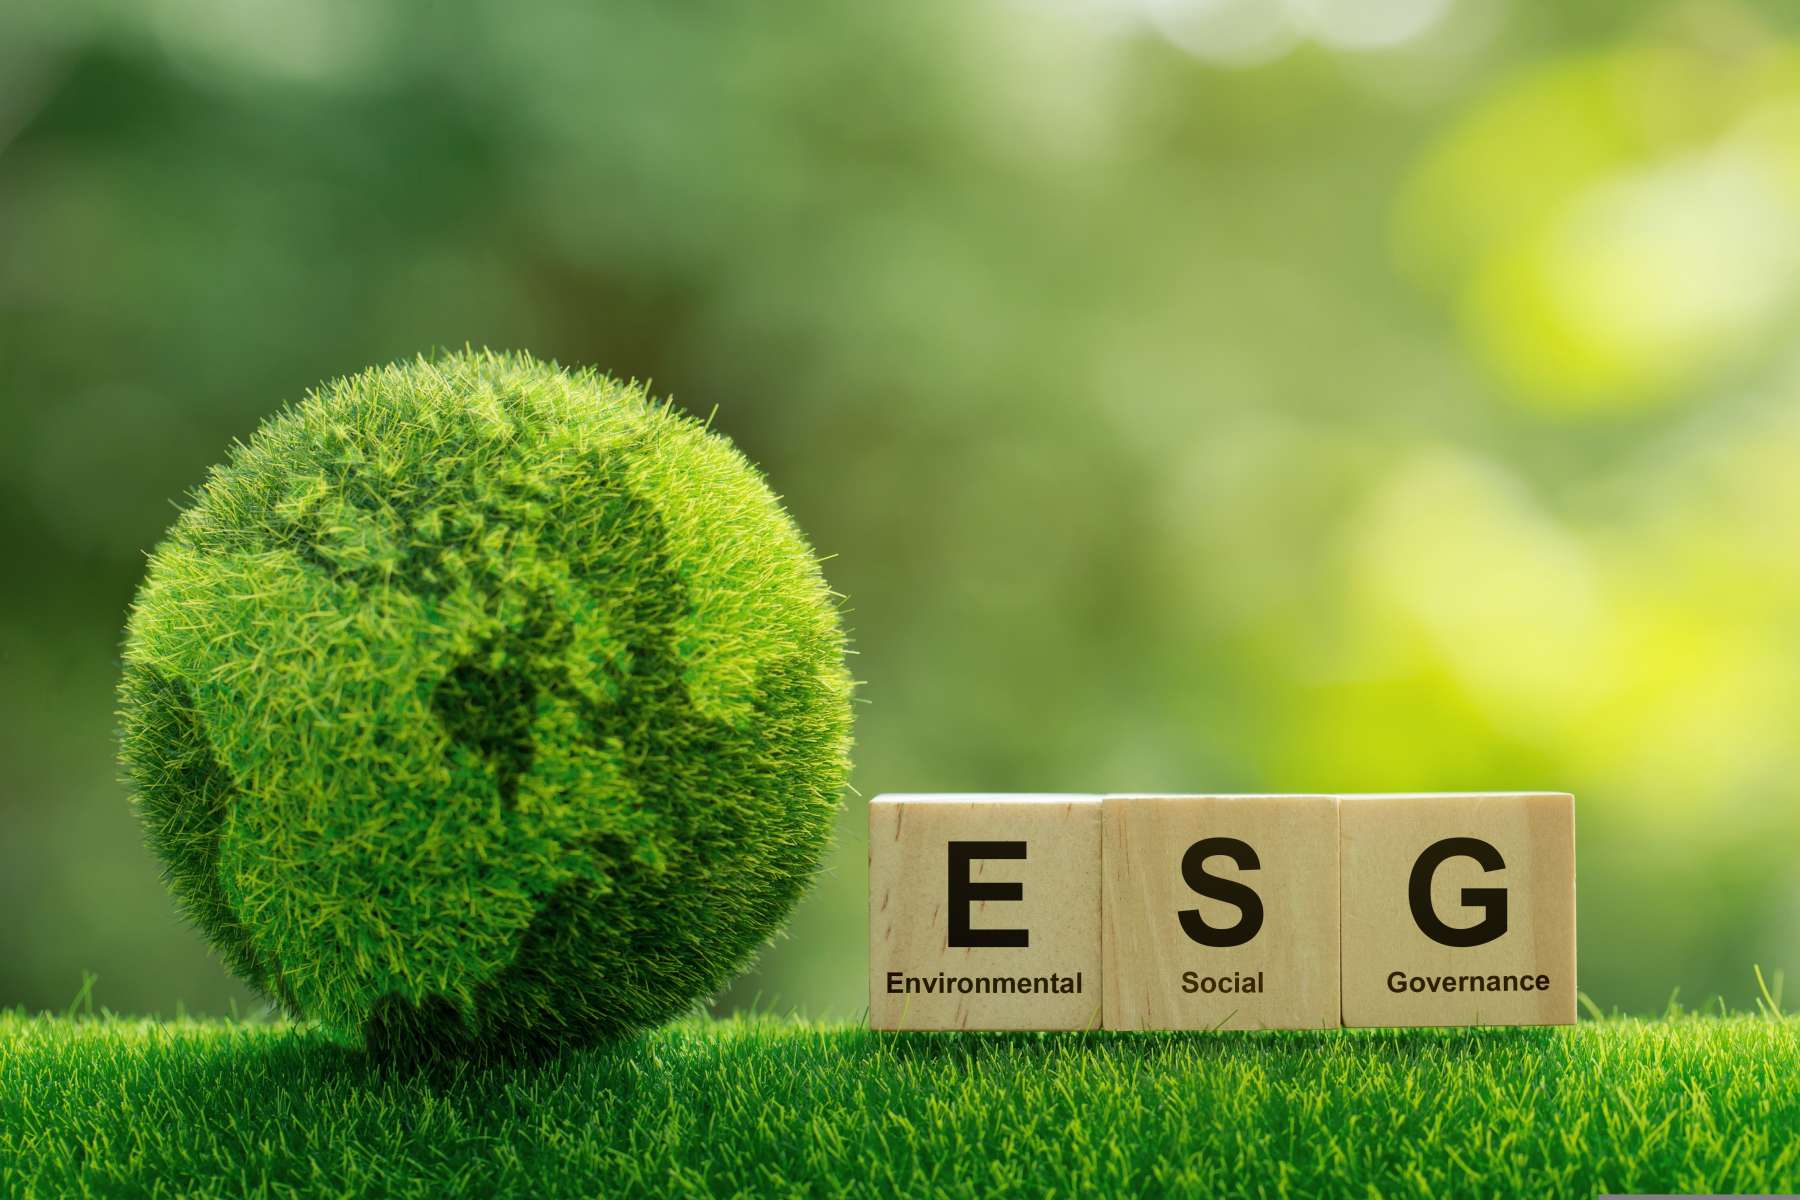 What is ESG Investing?